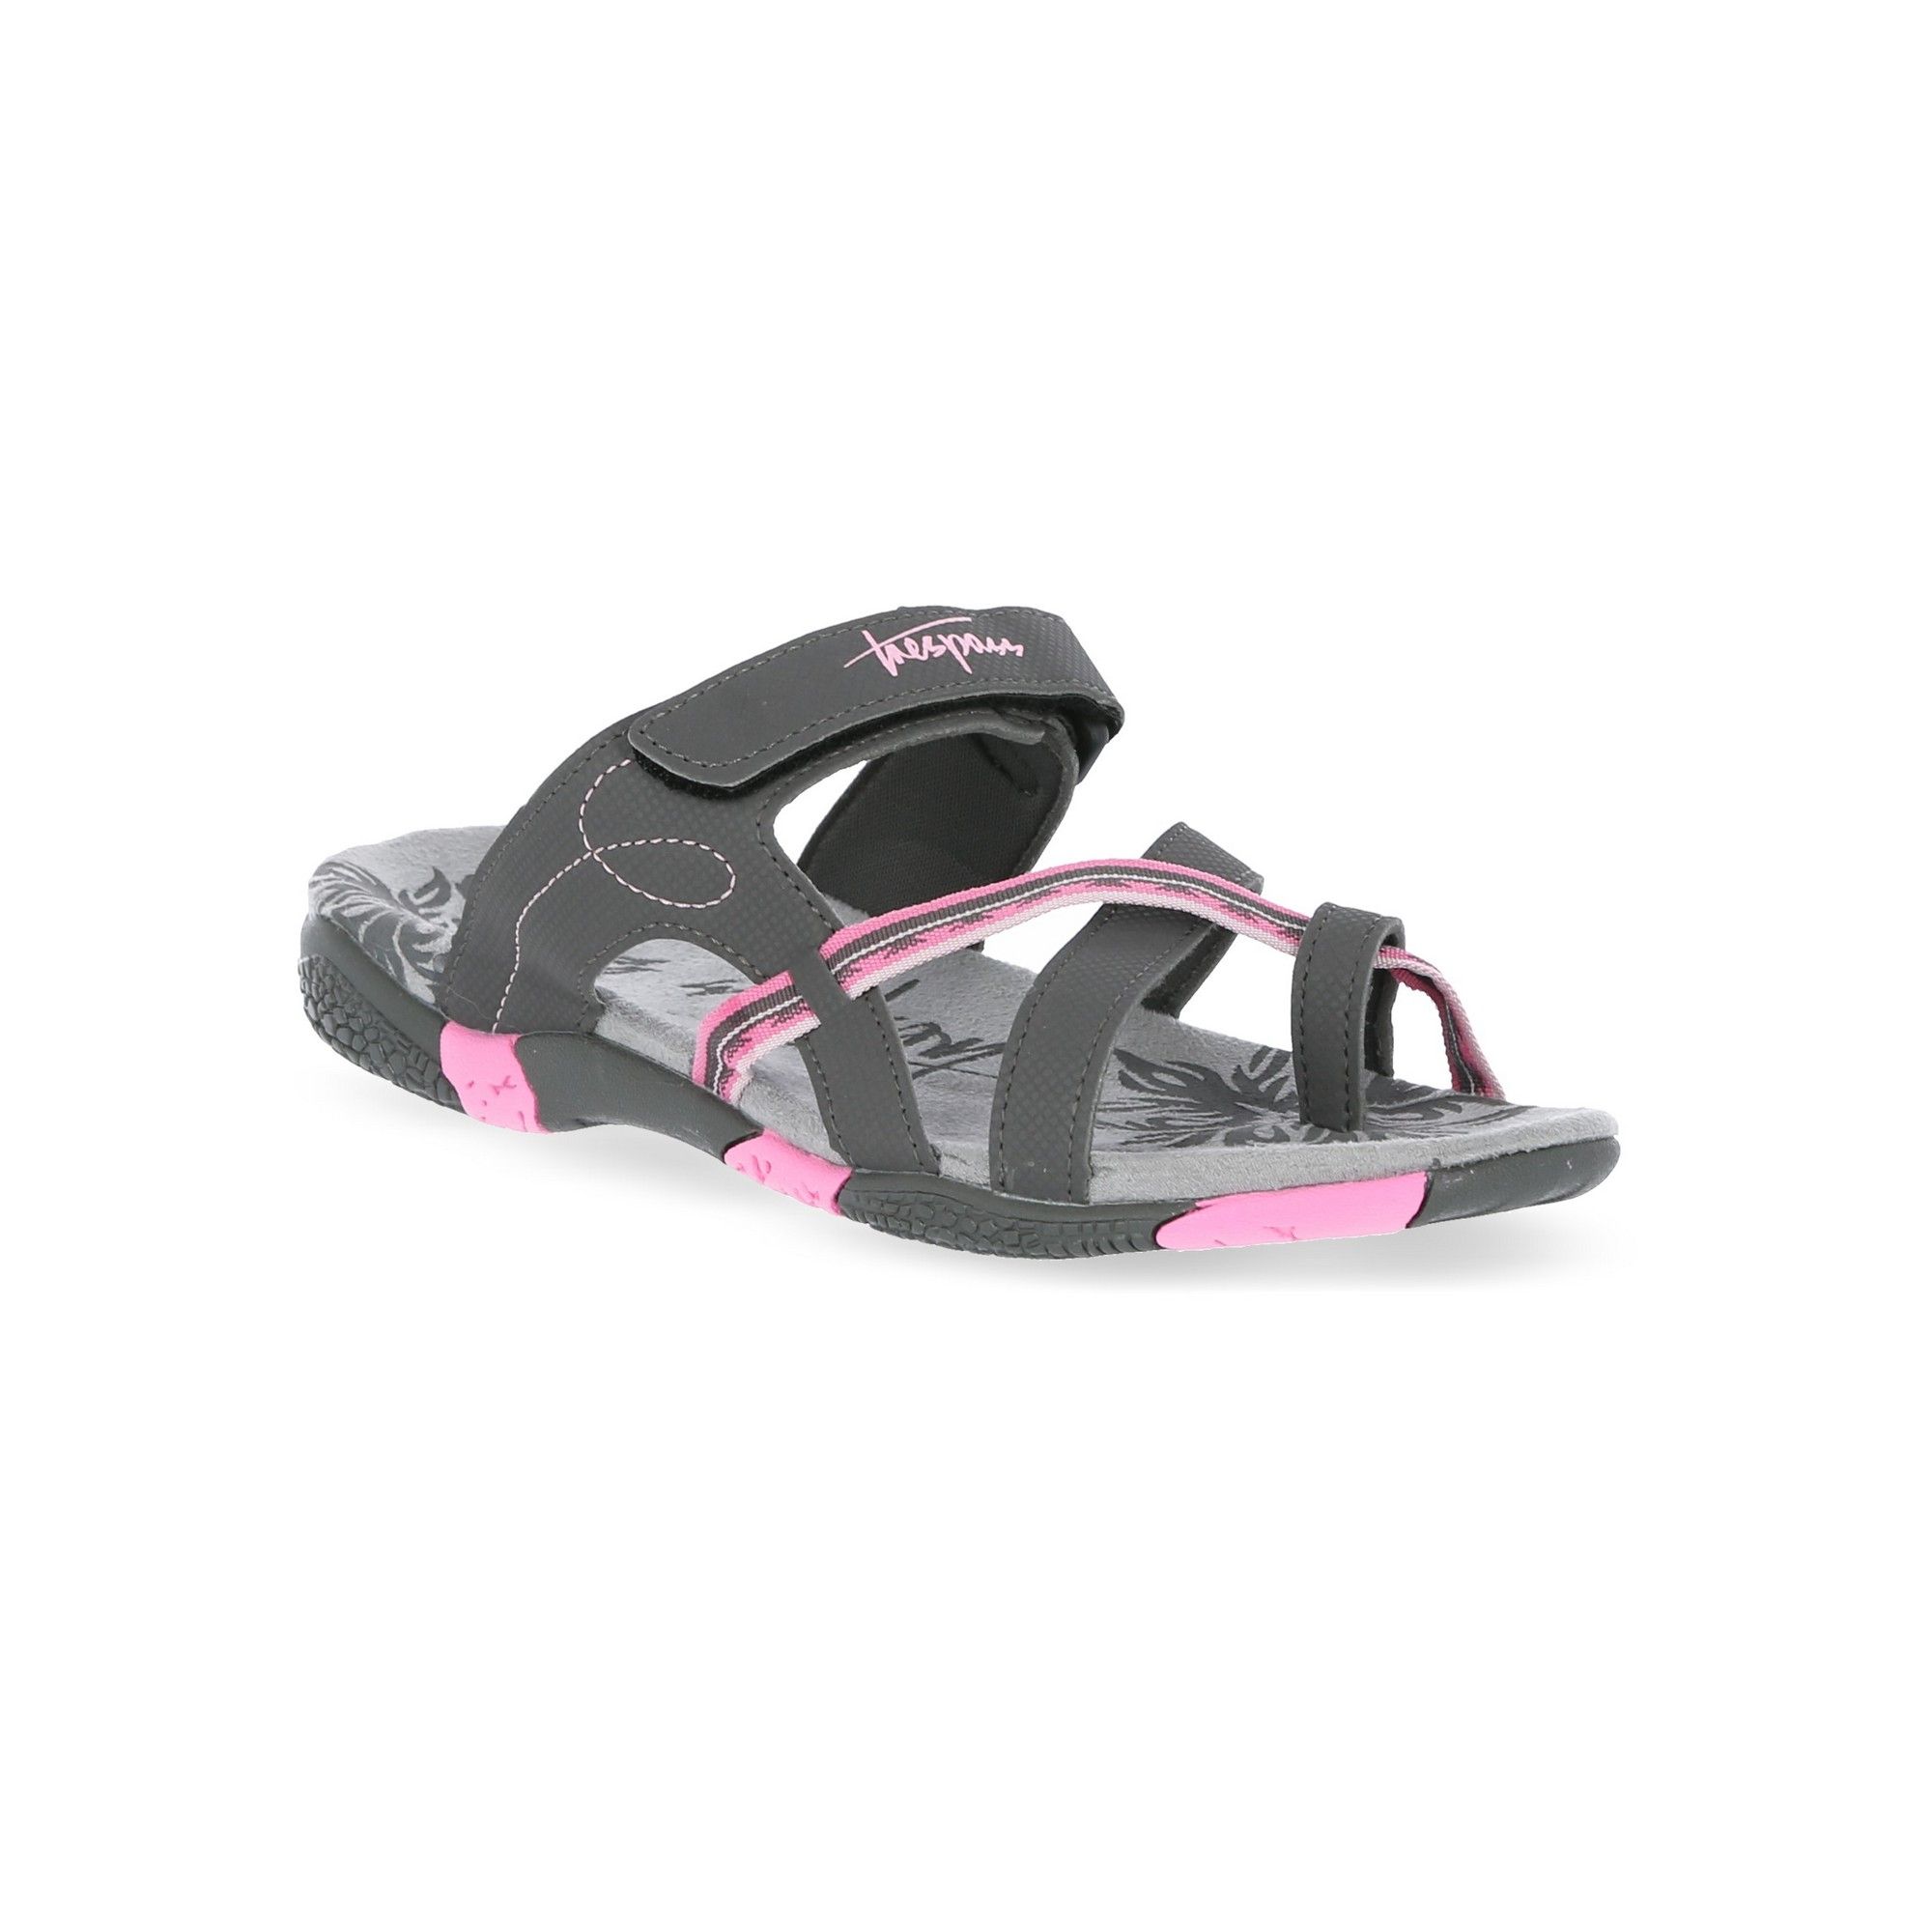 Upper: PU/Textile, Midsole: Moulded EVA, Outsole: TPR. Webbing toe post sandal. Fully lined upper with cushioning. Positive fit 1-point adjustment. Cushioned and moulded footbed. Durable traction outsole.